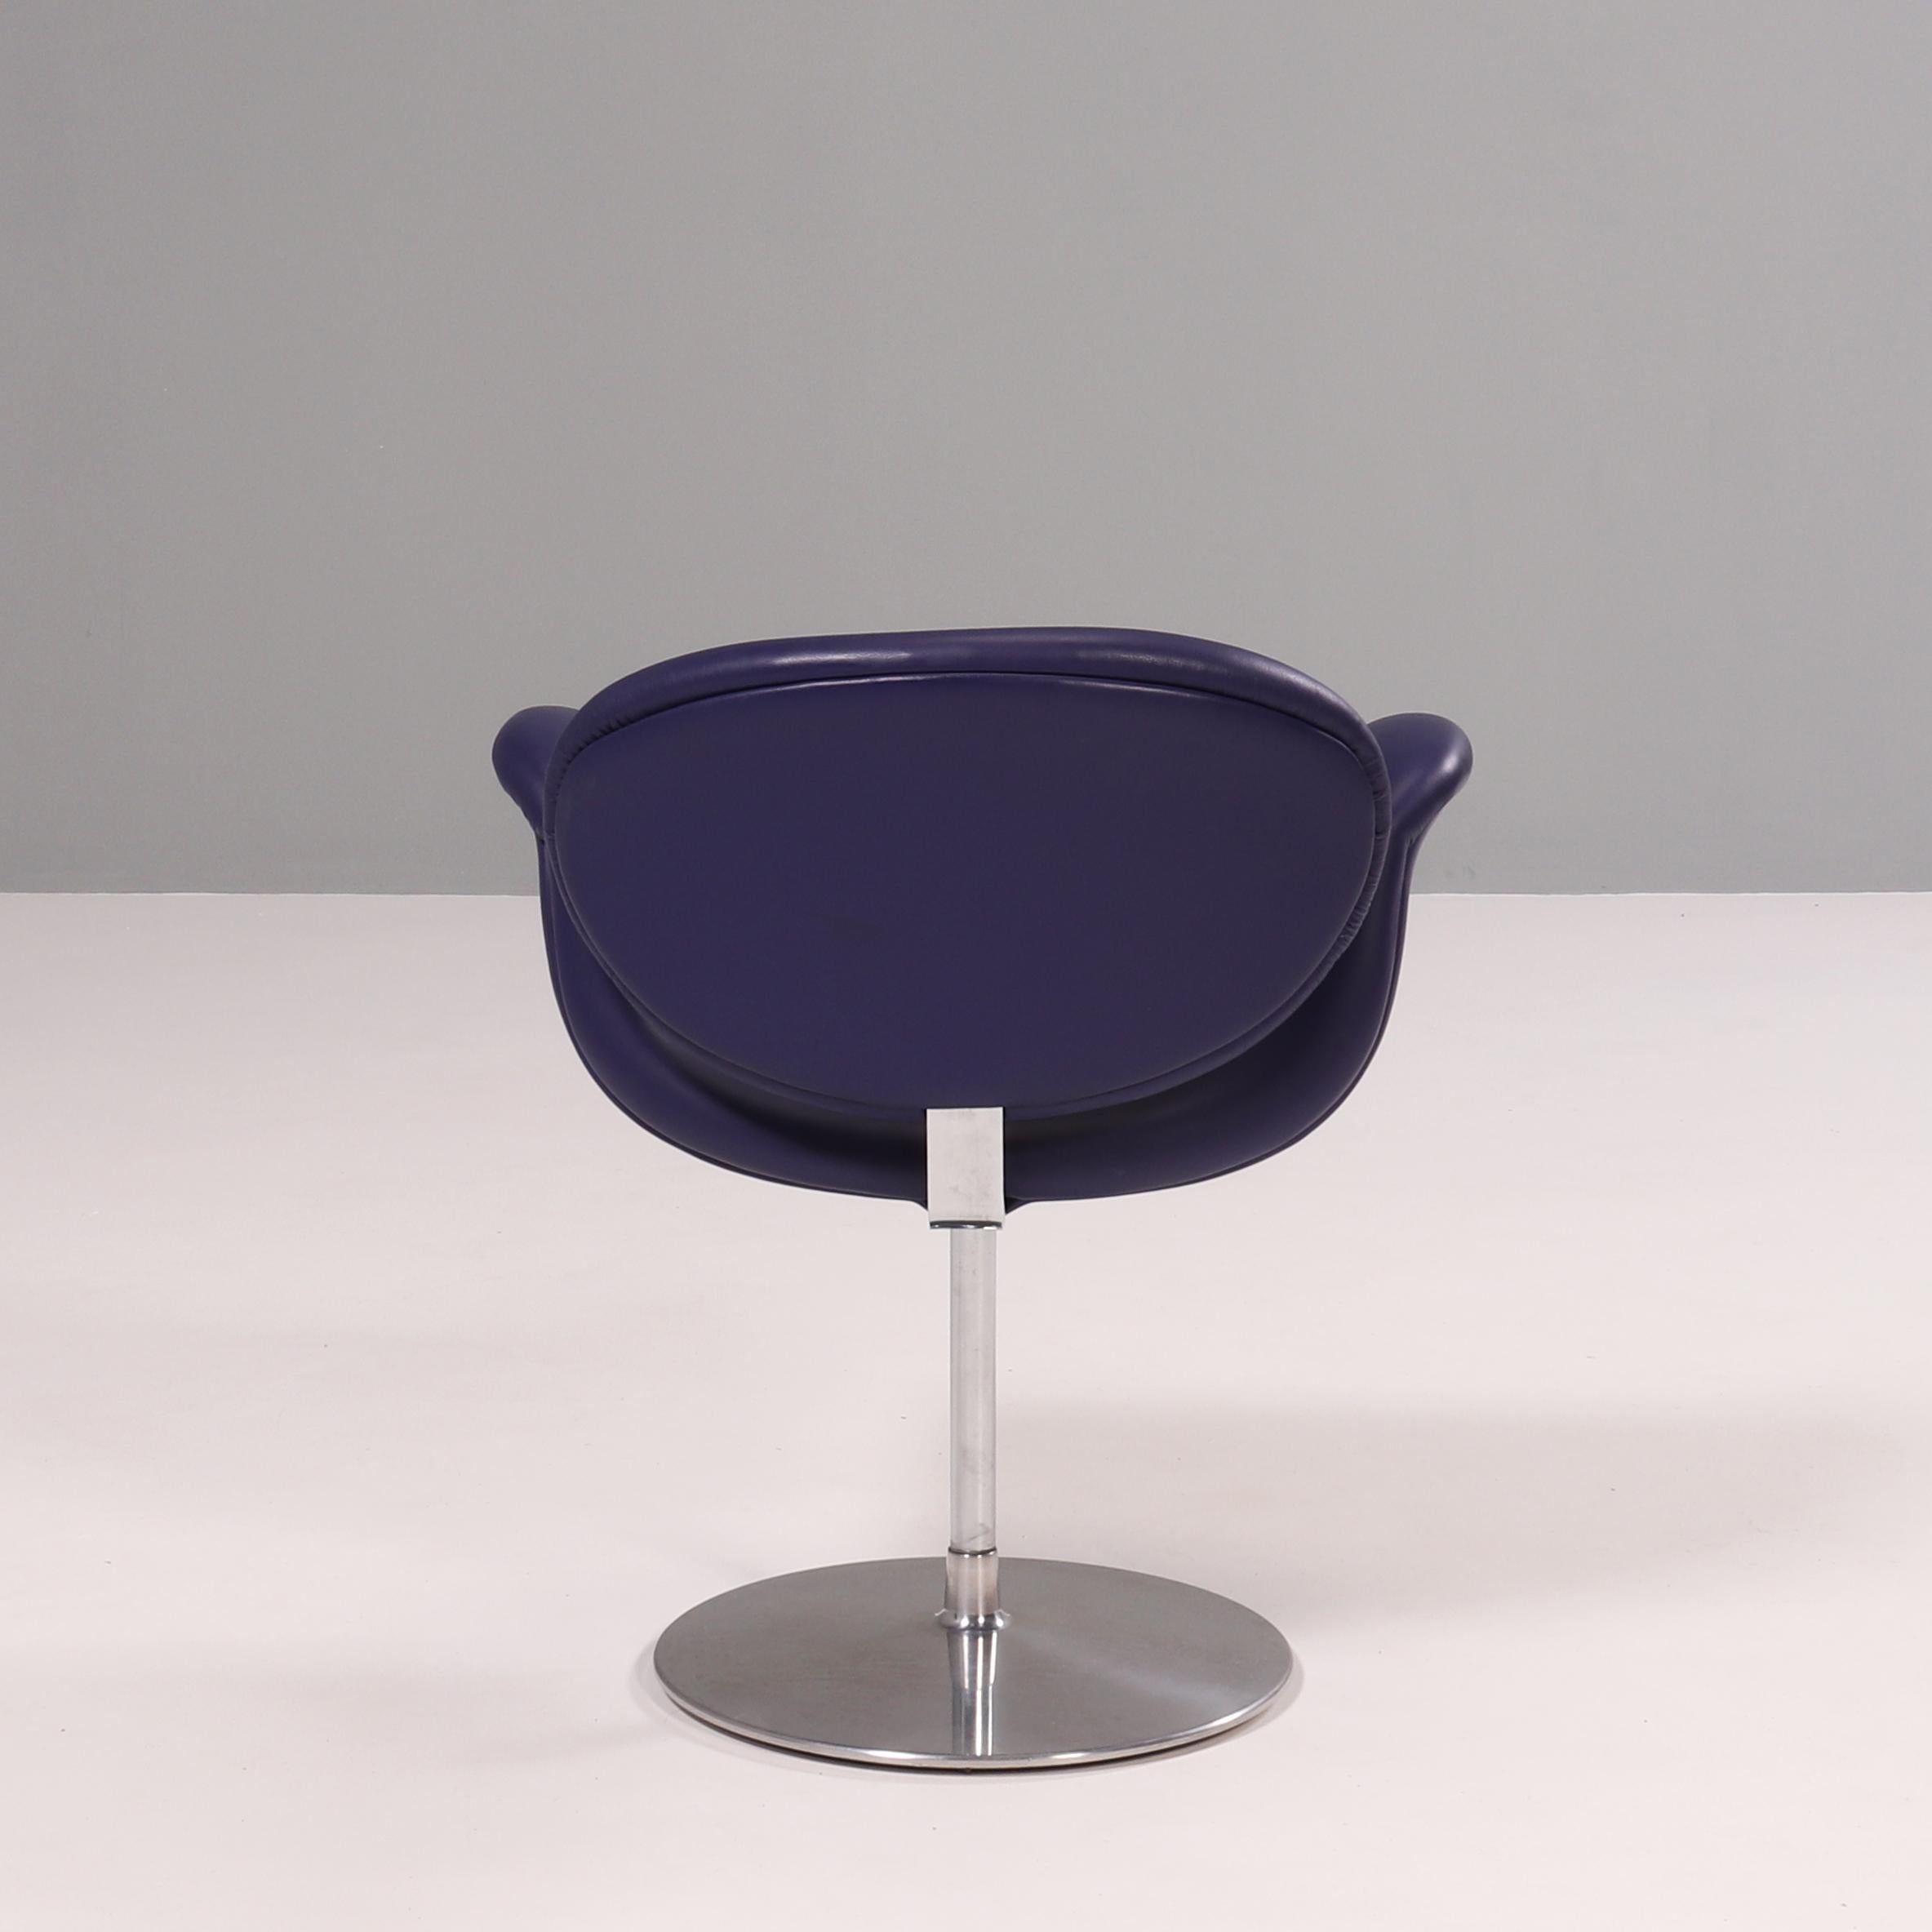 Originally designed by Pierre Paulin in 1965, the Little Tulip chair is a design icon.

Inspired by the flower, the chair has a Tulip-esque silhouette with a petal shaped seat which curves to create armrests.

Upholstered in purple leather, the